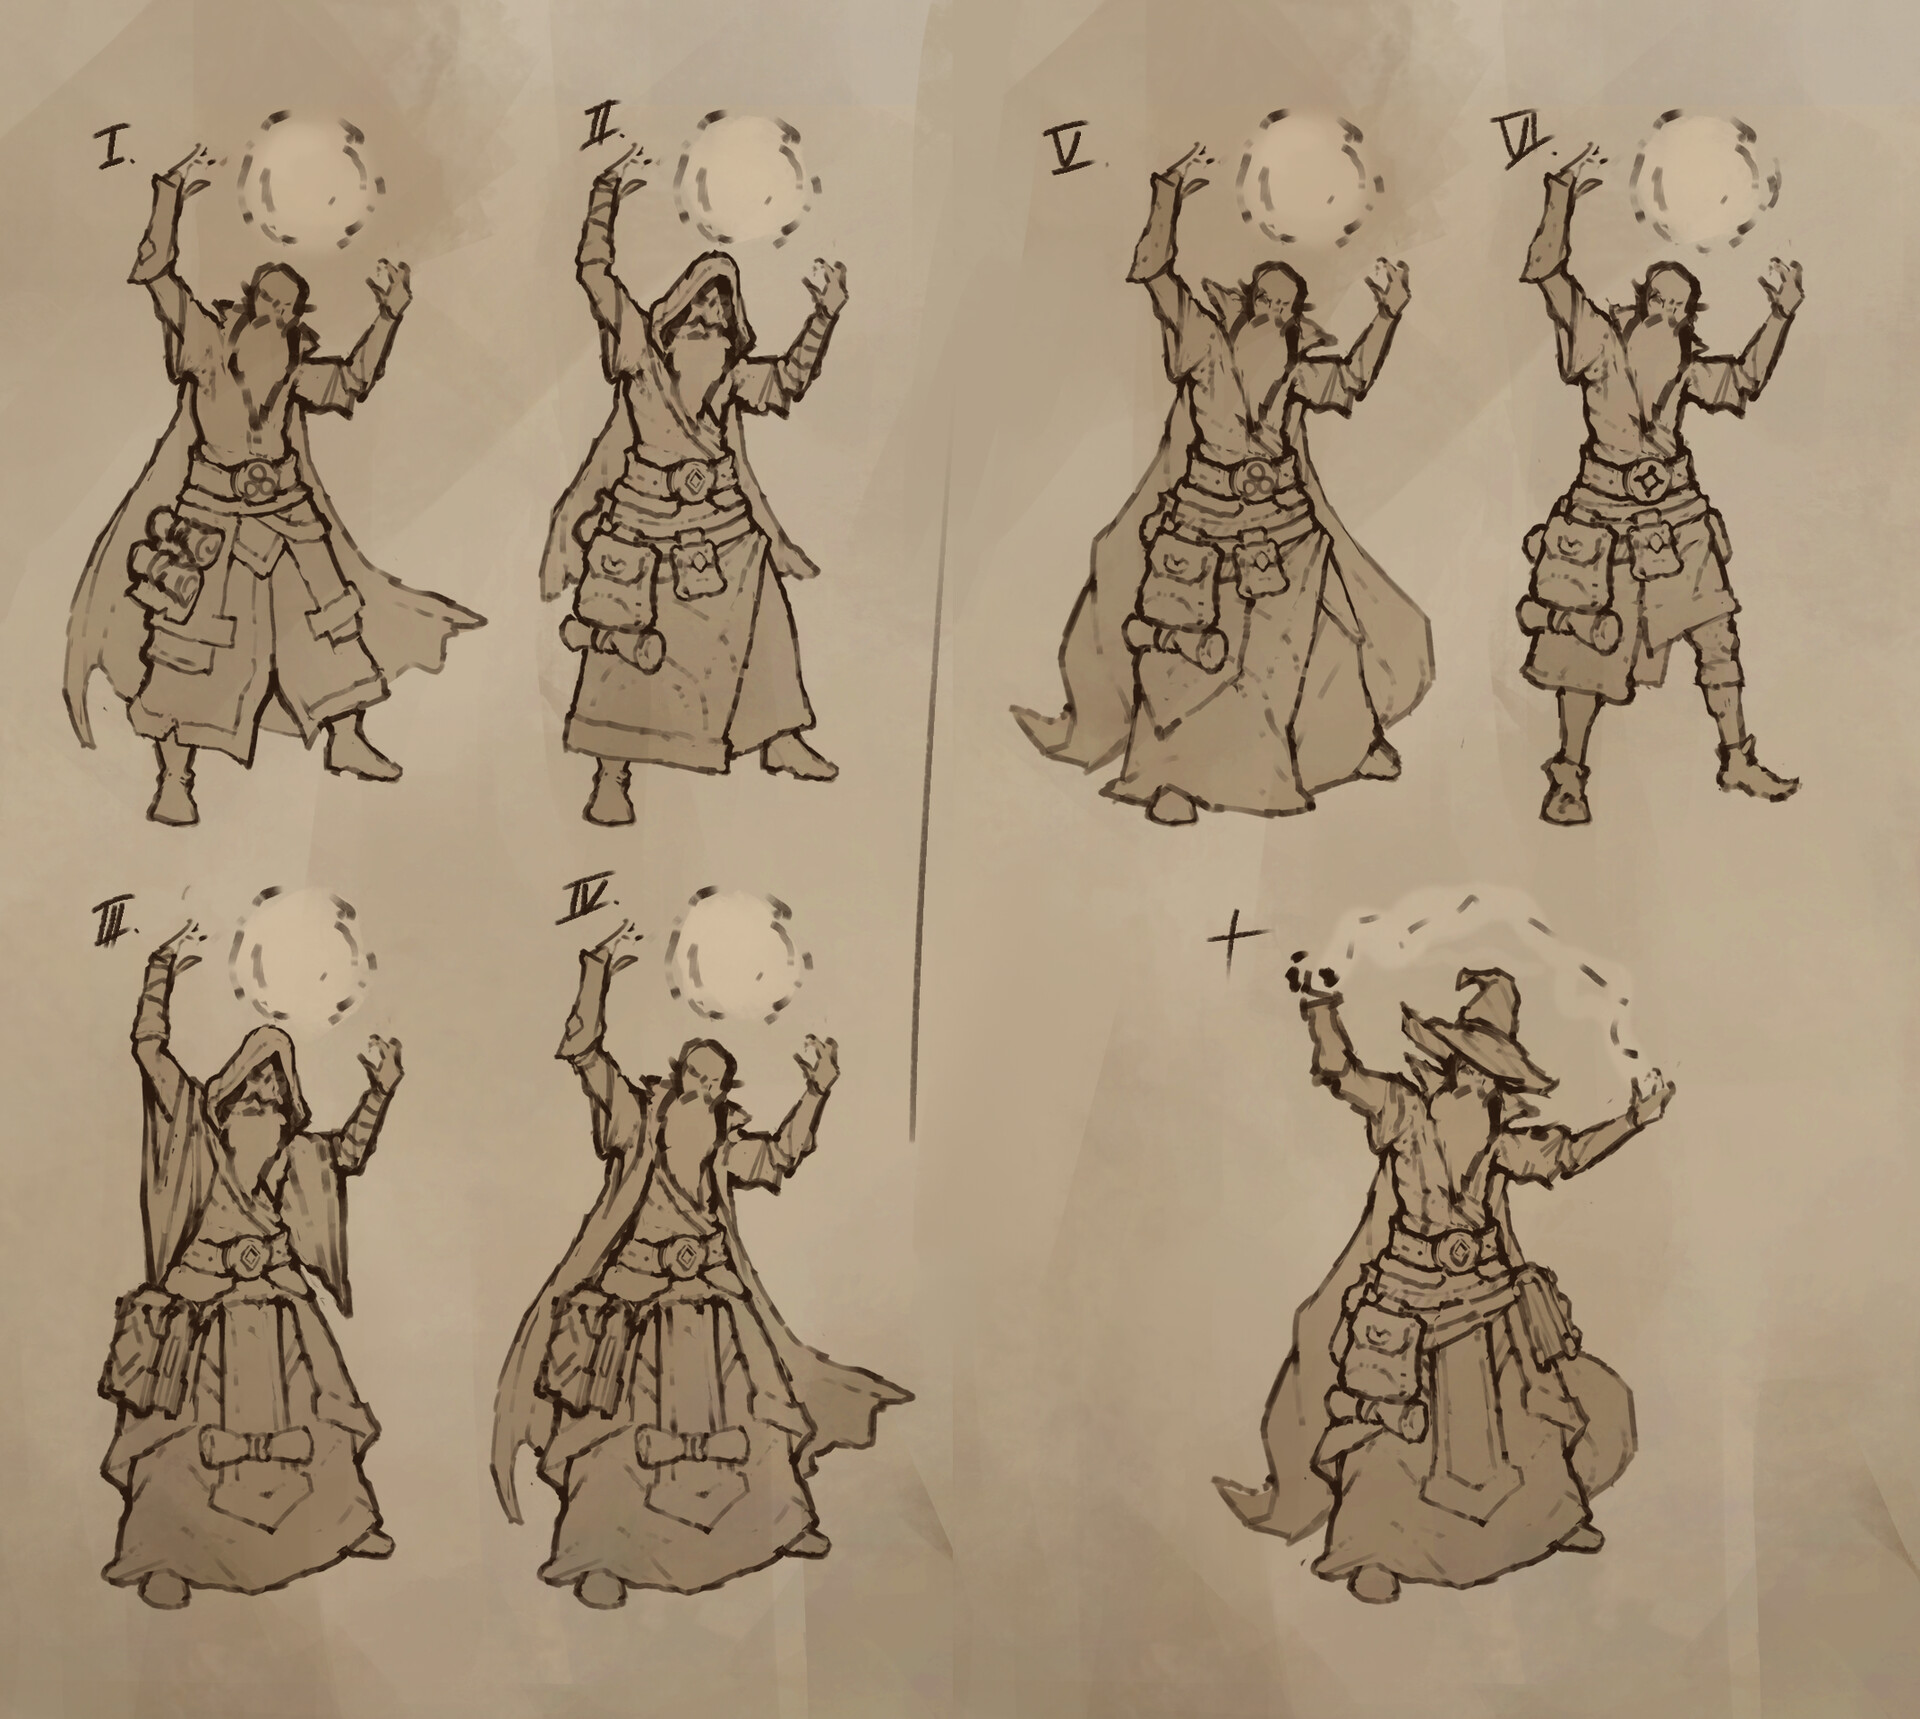 ArtStation - Character Concept - Old Wizard